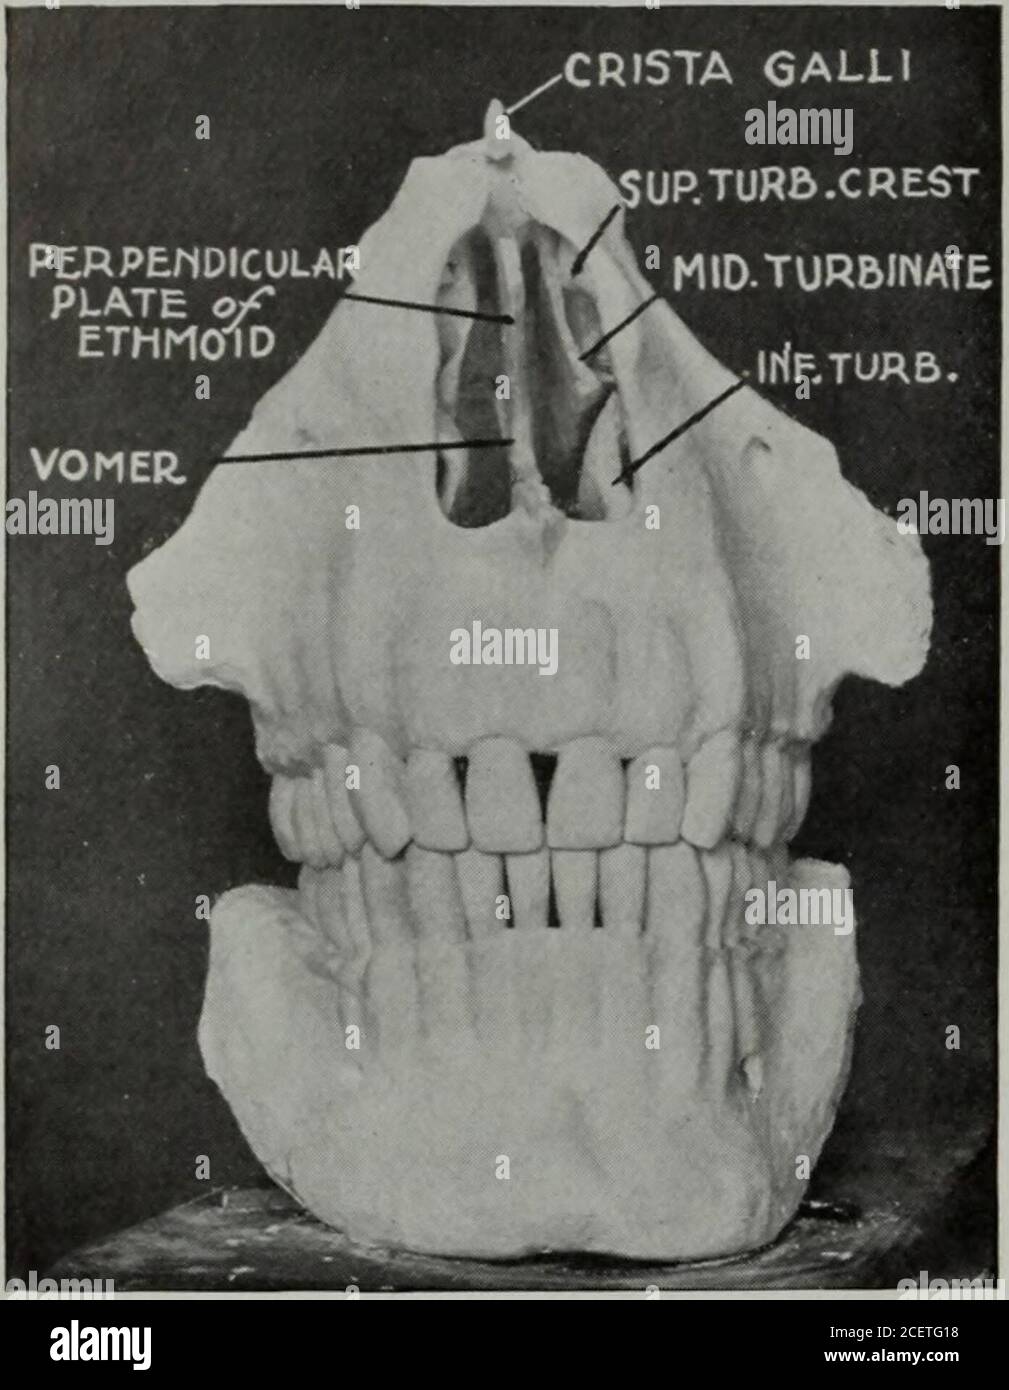 . The Dental cosmos. ess-fully get an accurate mental picture ofthe value, position, and relation of eachbone in the skull. No better way existsof forming a correct picture than con-structing, with our own hands, a modelof the internal face and skull in someplastic material. It should be enlarged National Dental Association, at its annuali t, Va./ July 22, 1913.) on a definite scale, so that we can tracewith our hands the anatomical and. to acertain degree, the physiological func-tions of all the parts. In Fig. 1 are shown, modeled inplaster of Paris, the principal bones ofthe face concerned i Stock Photo